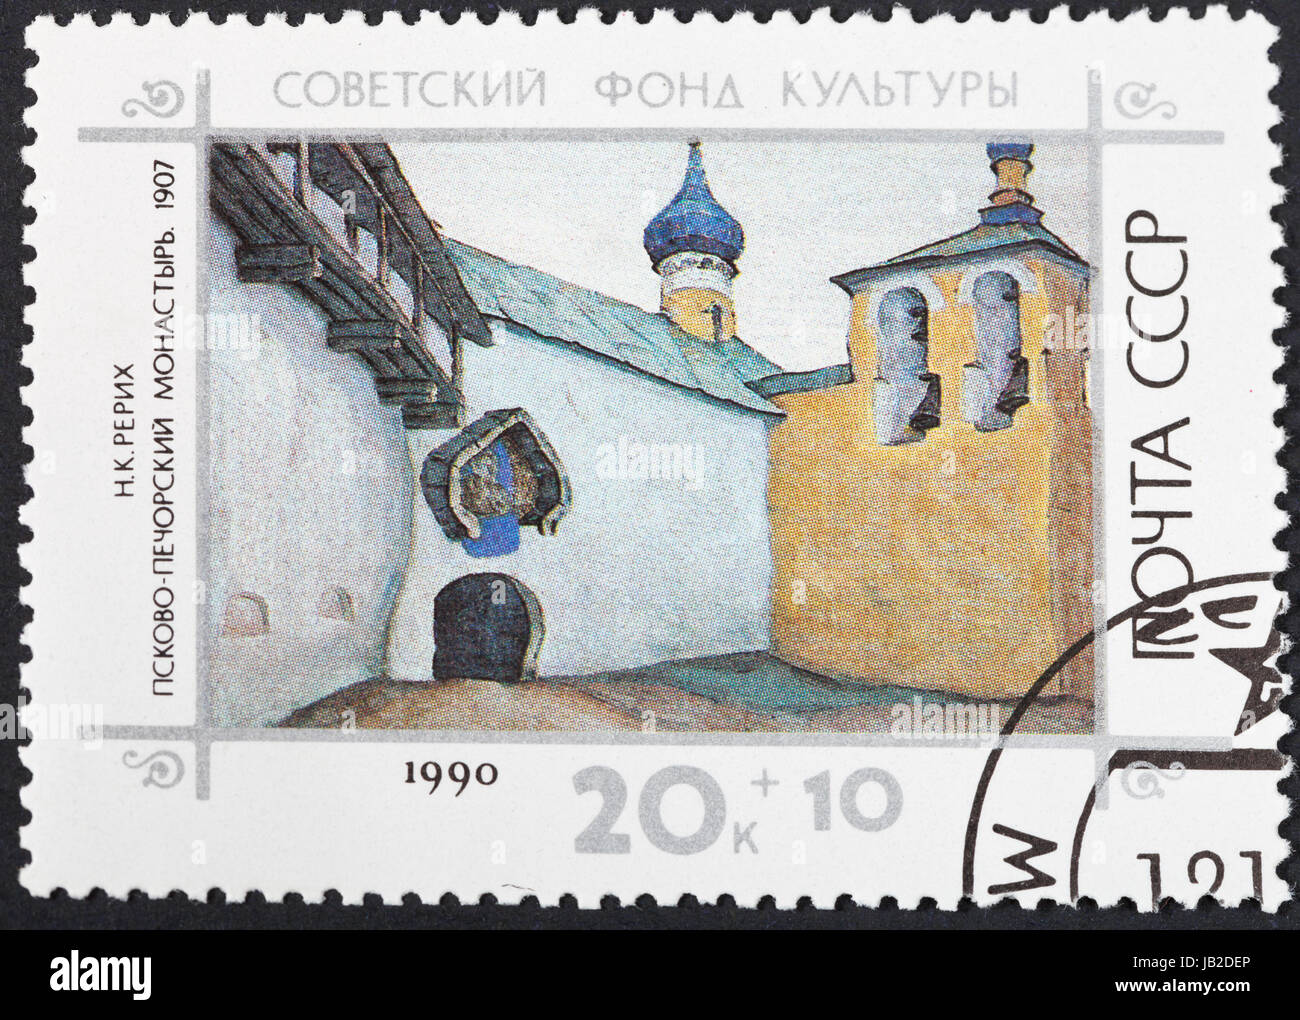 USSR - CIRCA 1990: A postage stamp printed in the USSR shows Nicholas Roerich painting Pskovo-Pechersky Monastery, circa 1990 Stock Photo